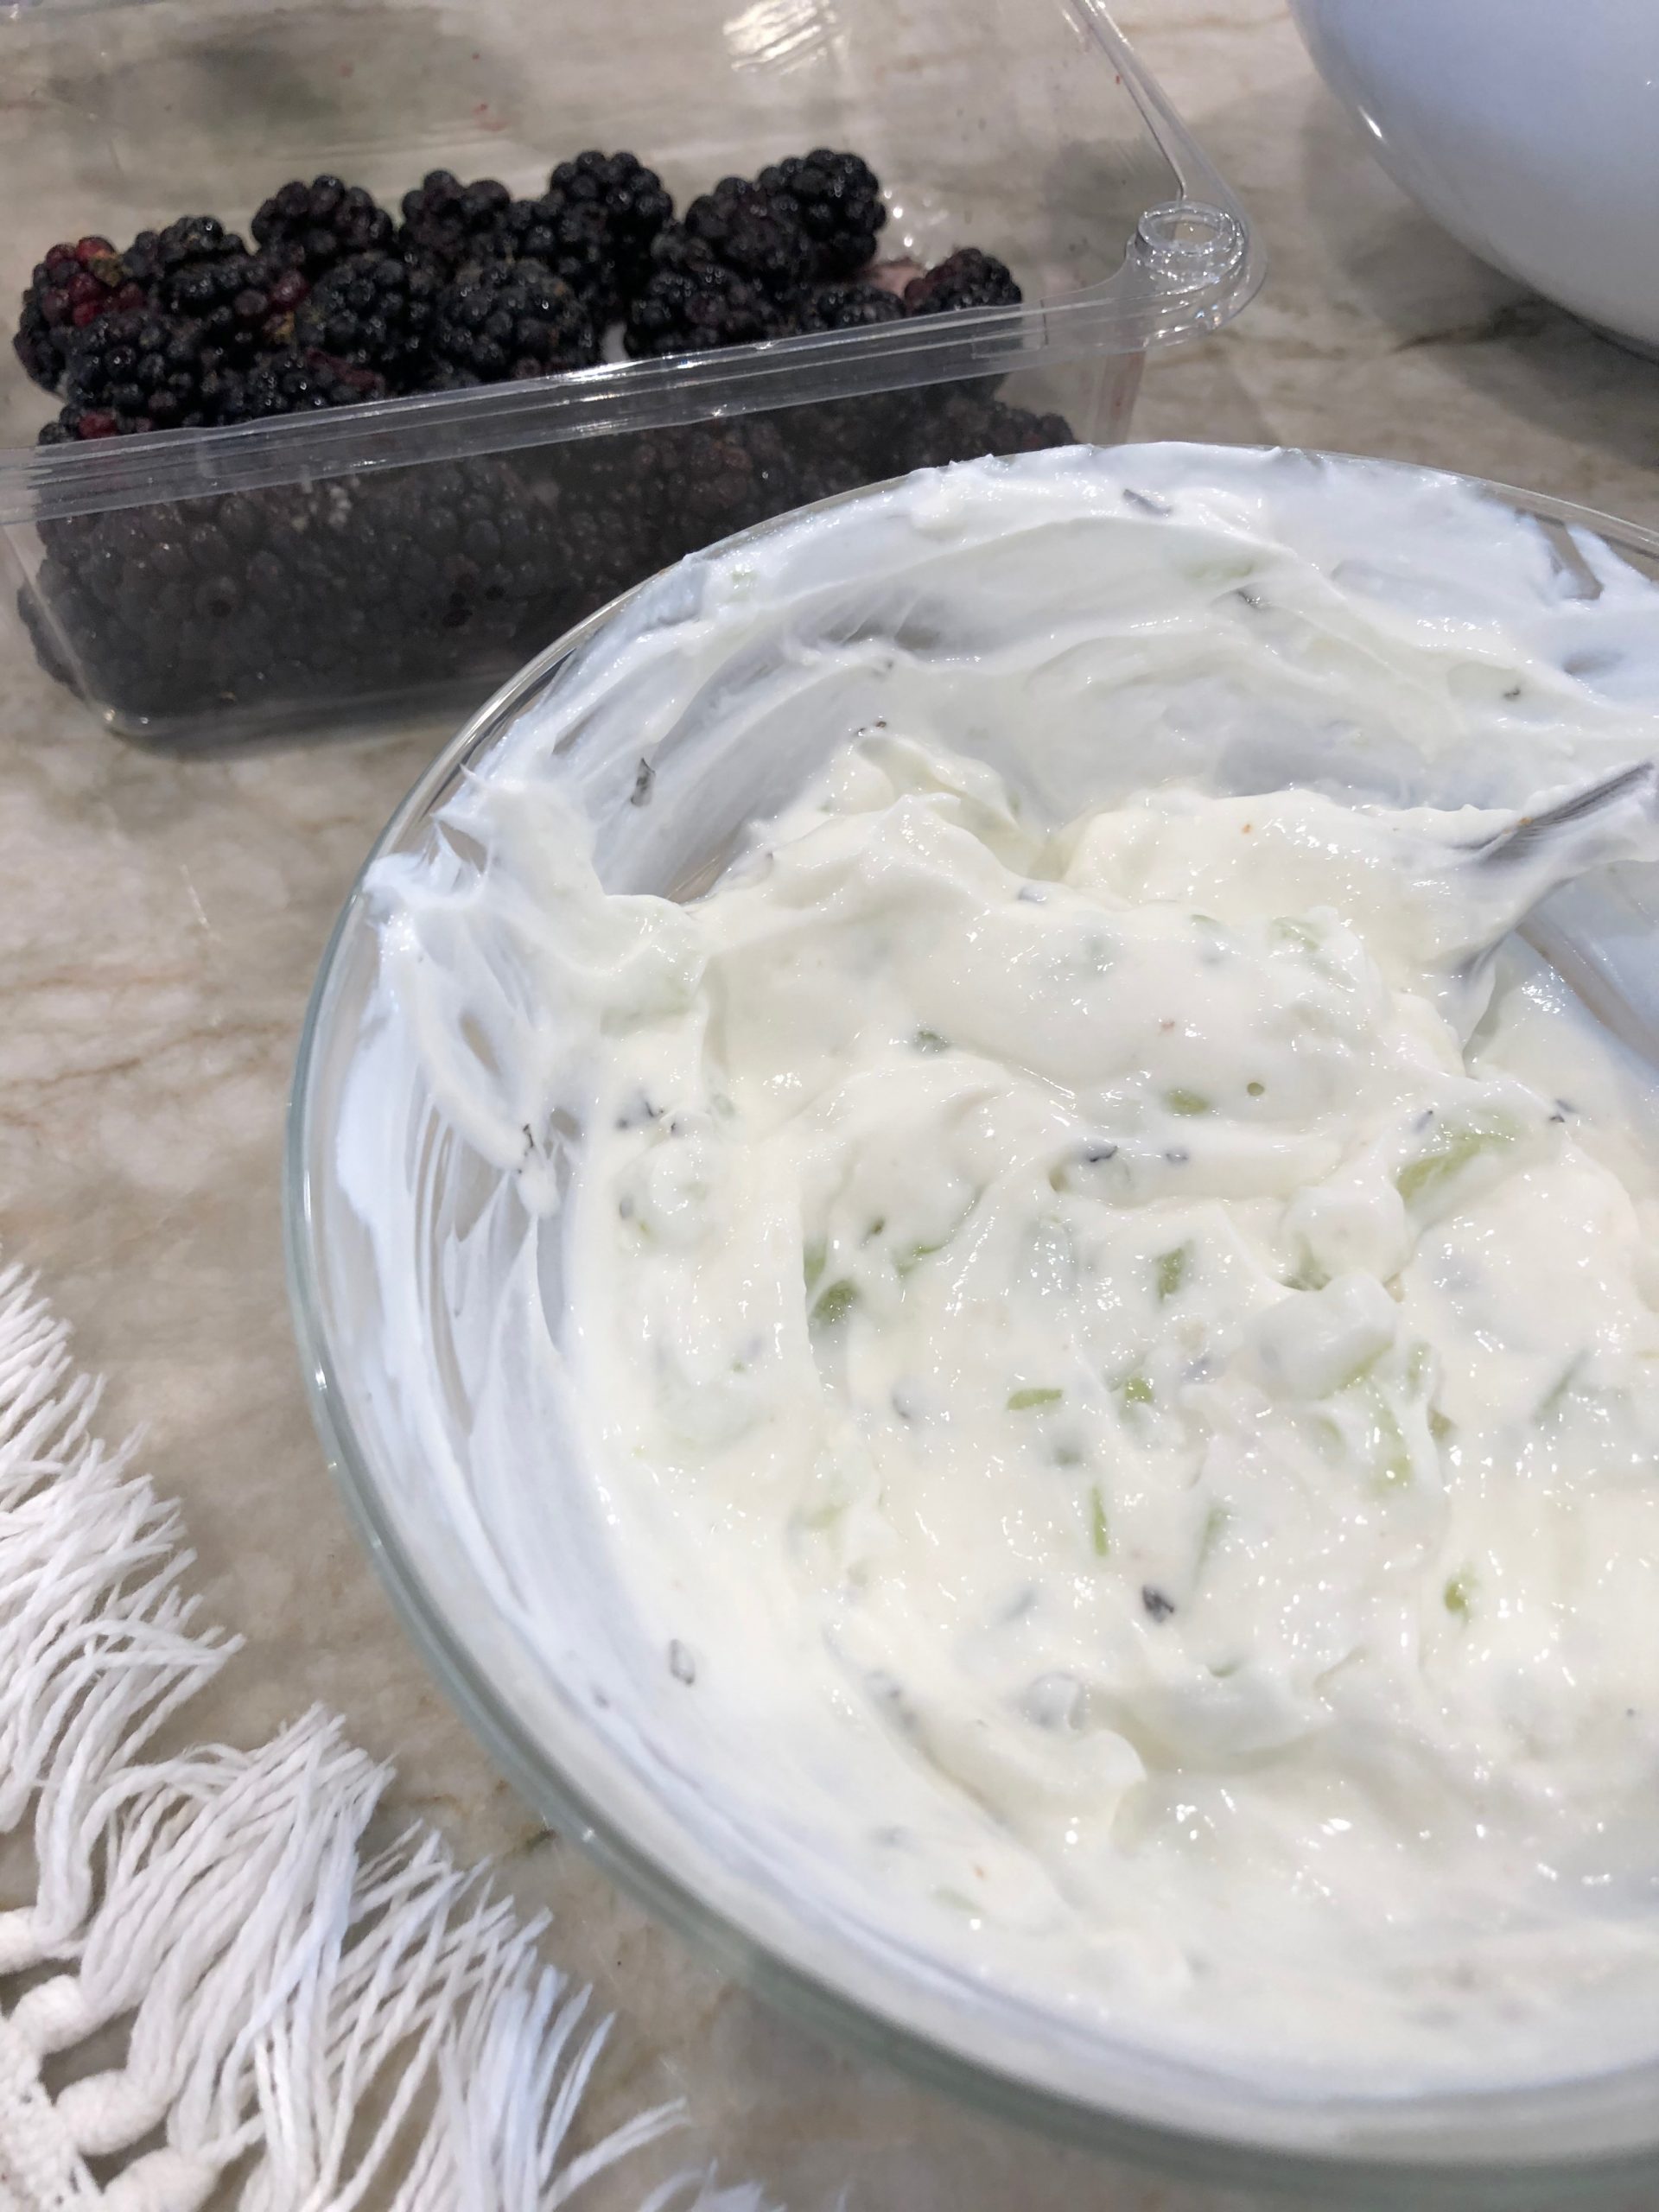 Tzatziki Sauce in a bowl with blackberries next to it